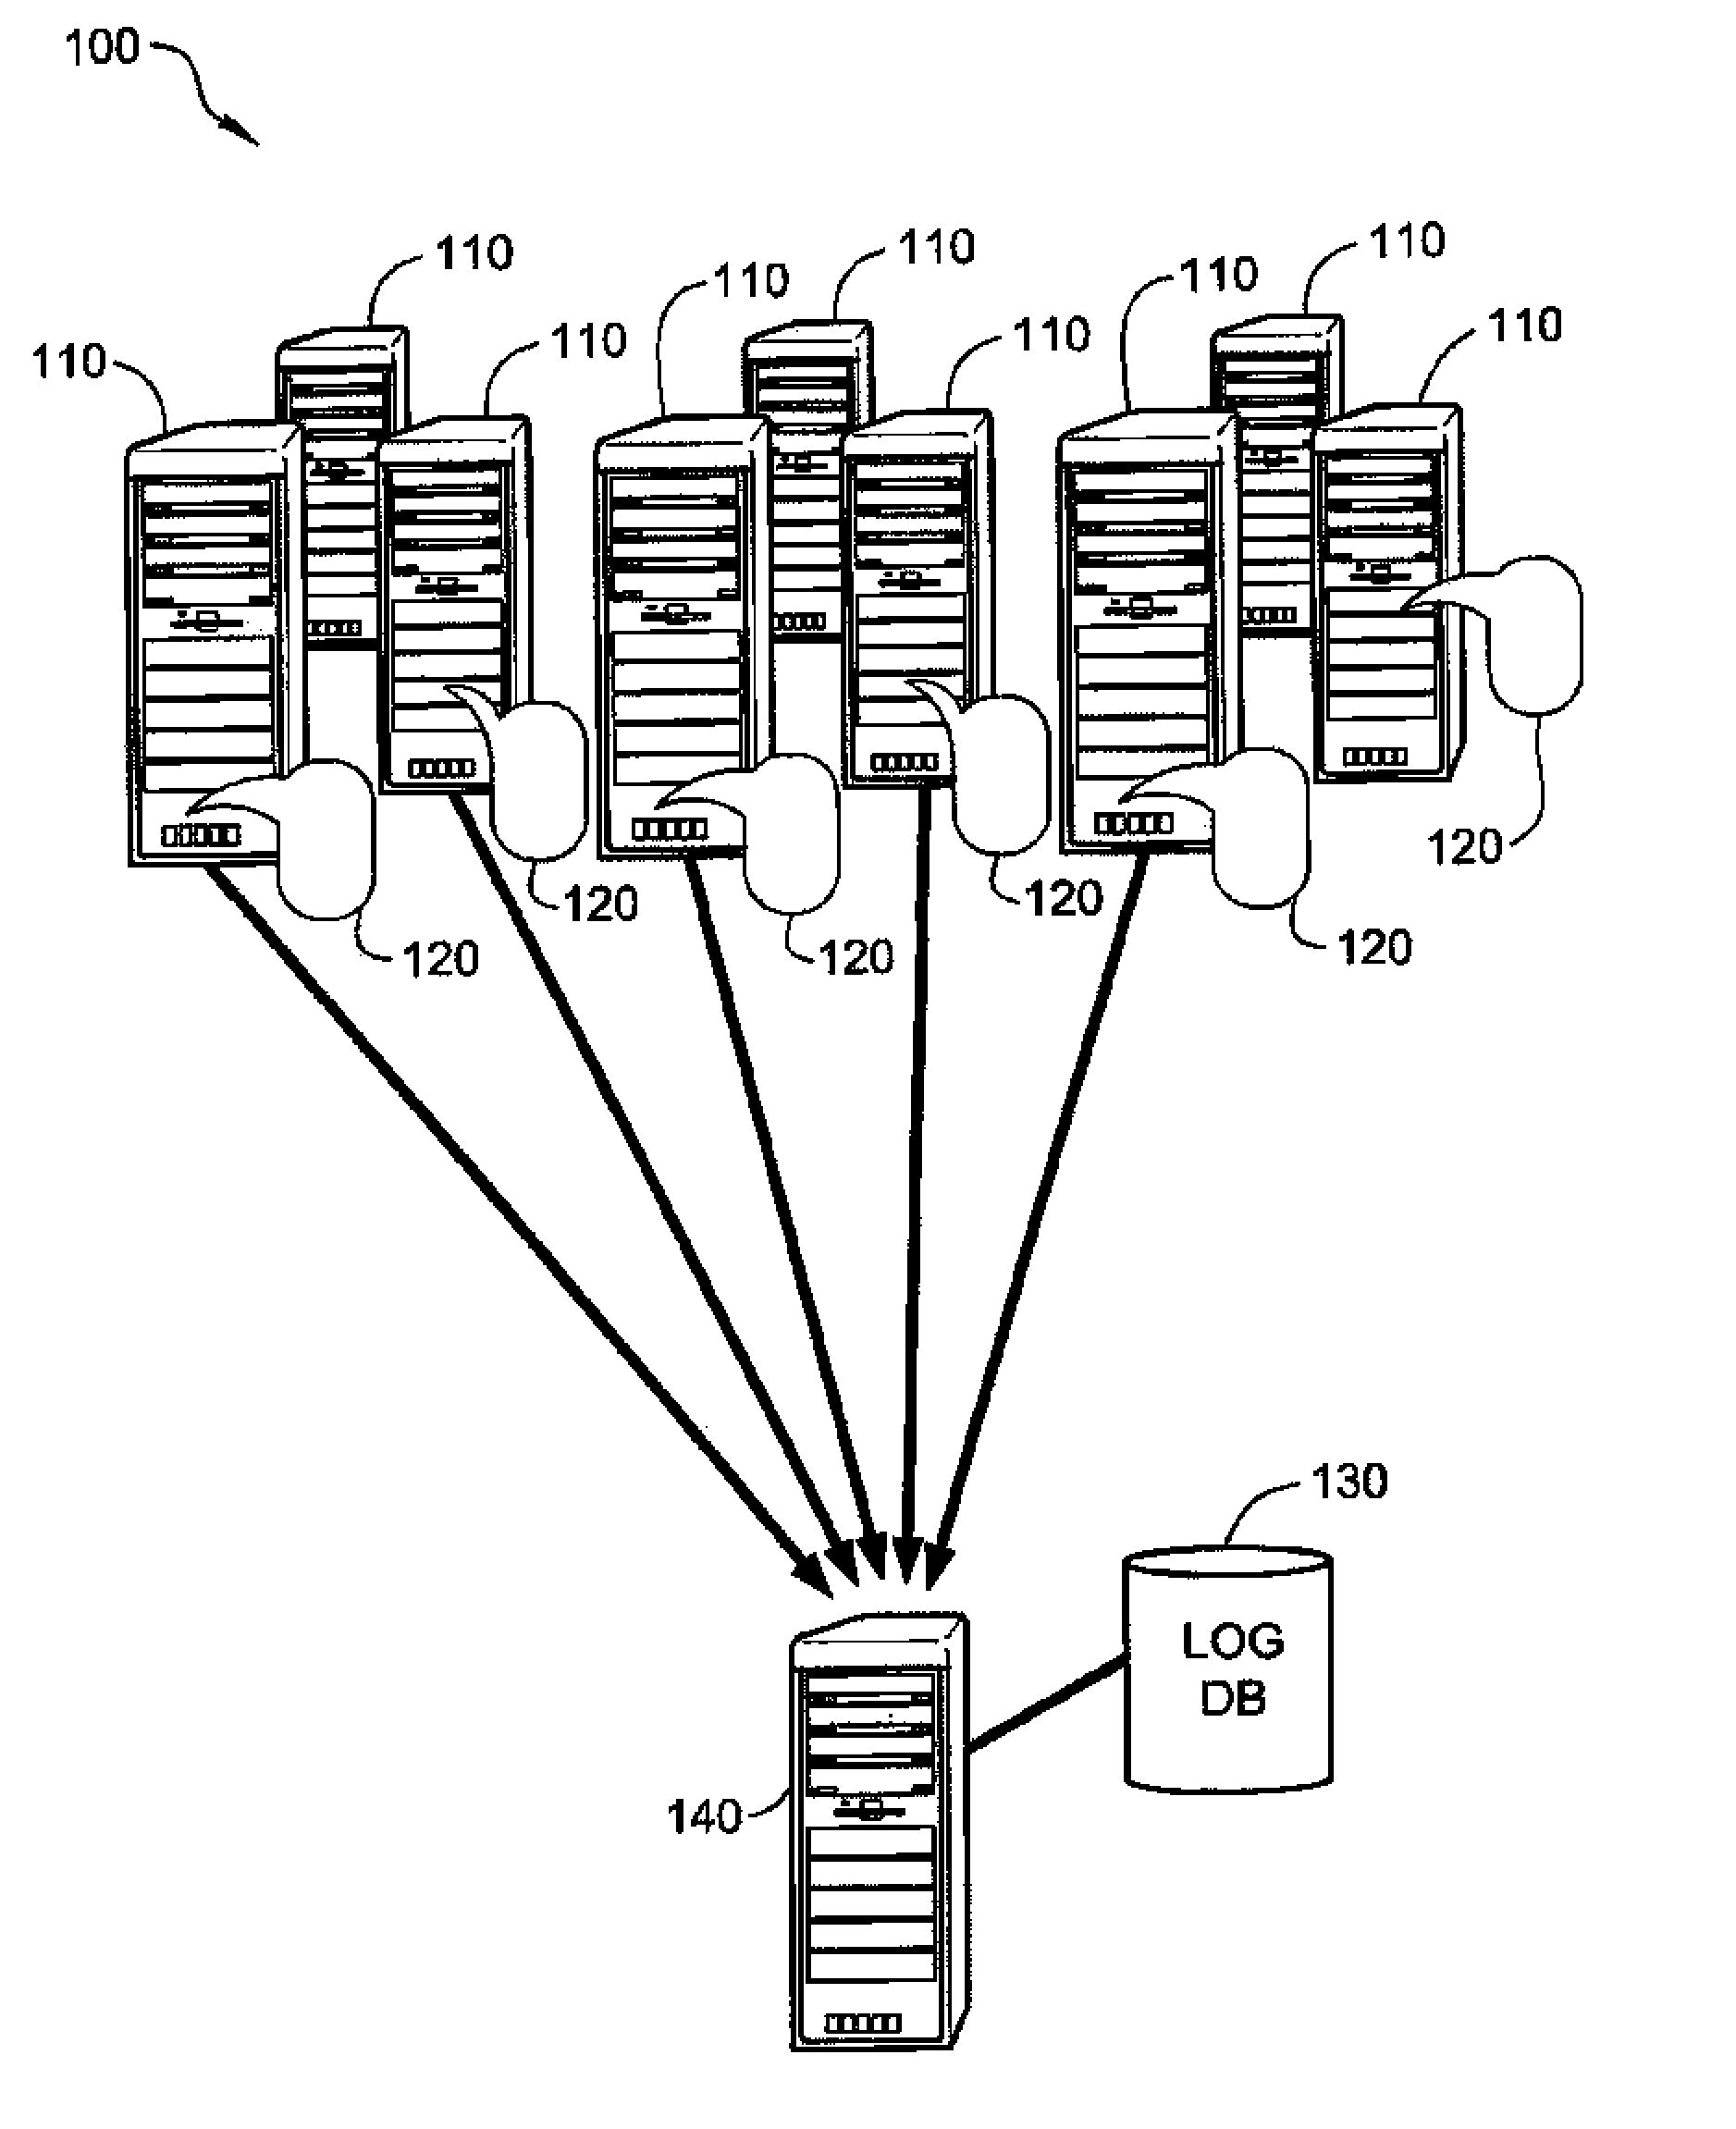 System and Method for Collection and Analysis of Server Log Files